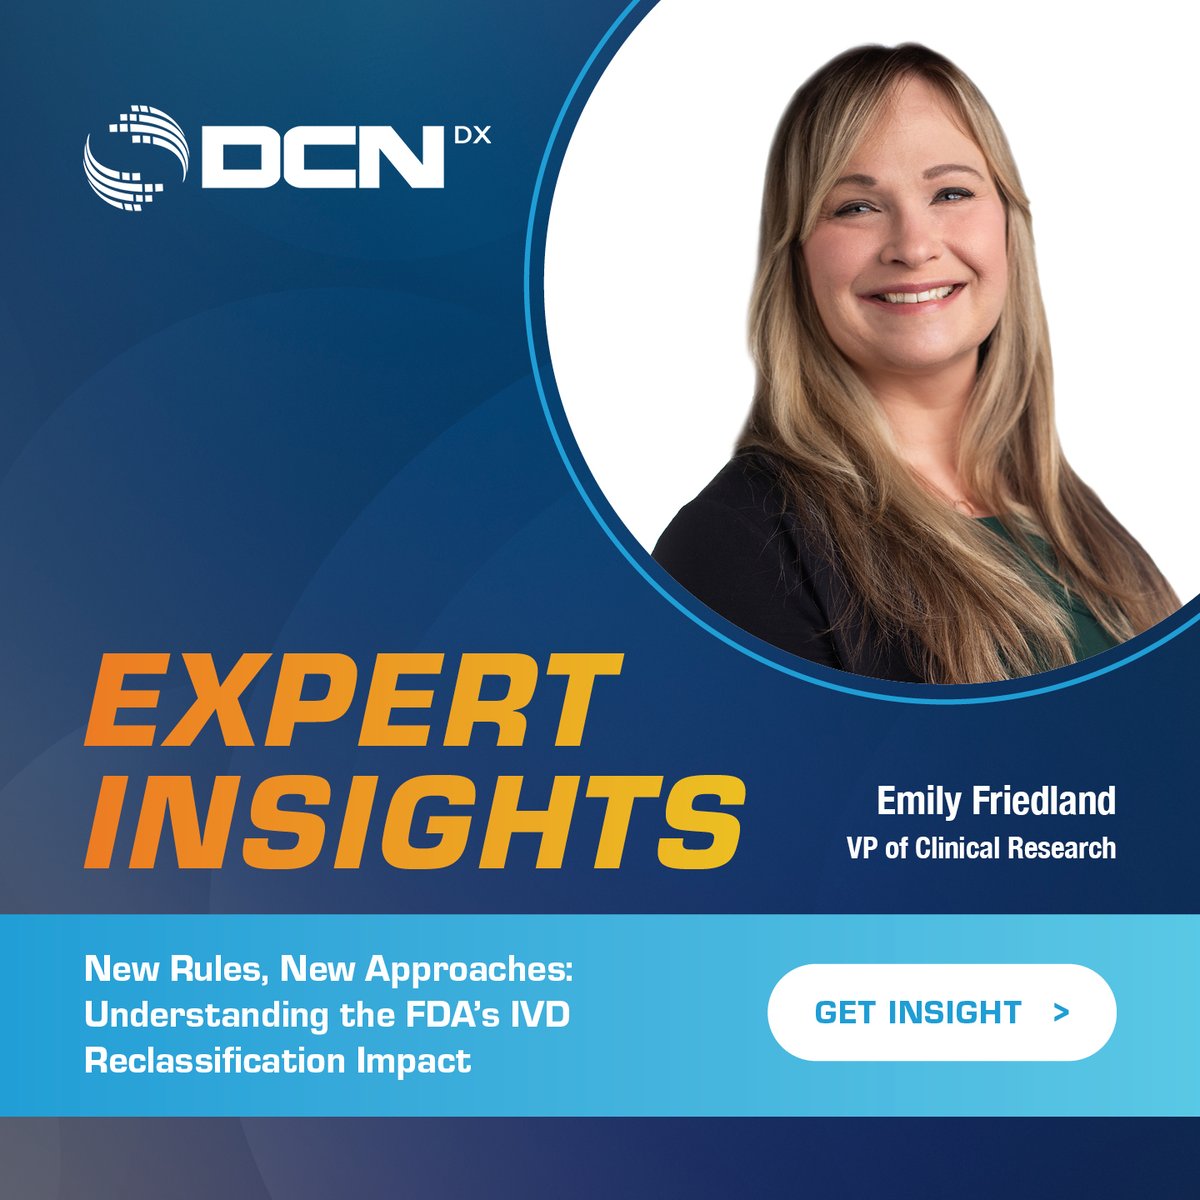 🦠 In our recent #ExpertInsights article, our VP of Clinical Research delves into the FDA's recent decision to reclassify certain #infectiousdisease #IVDs from Class III to Class II. 
hubs.ly/Q02sH0DH0

#DCNDx #FDA #Regulatory #ClinicalStudies #Diagnostics